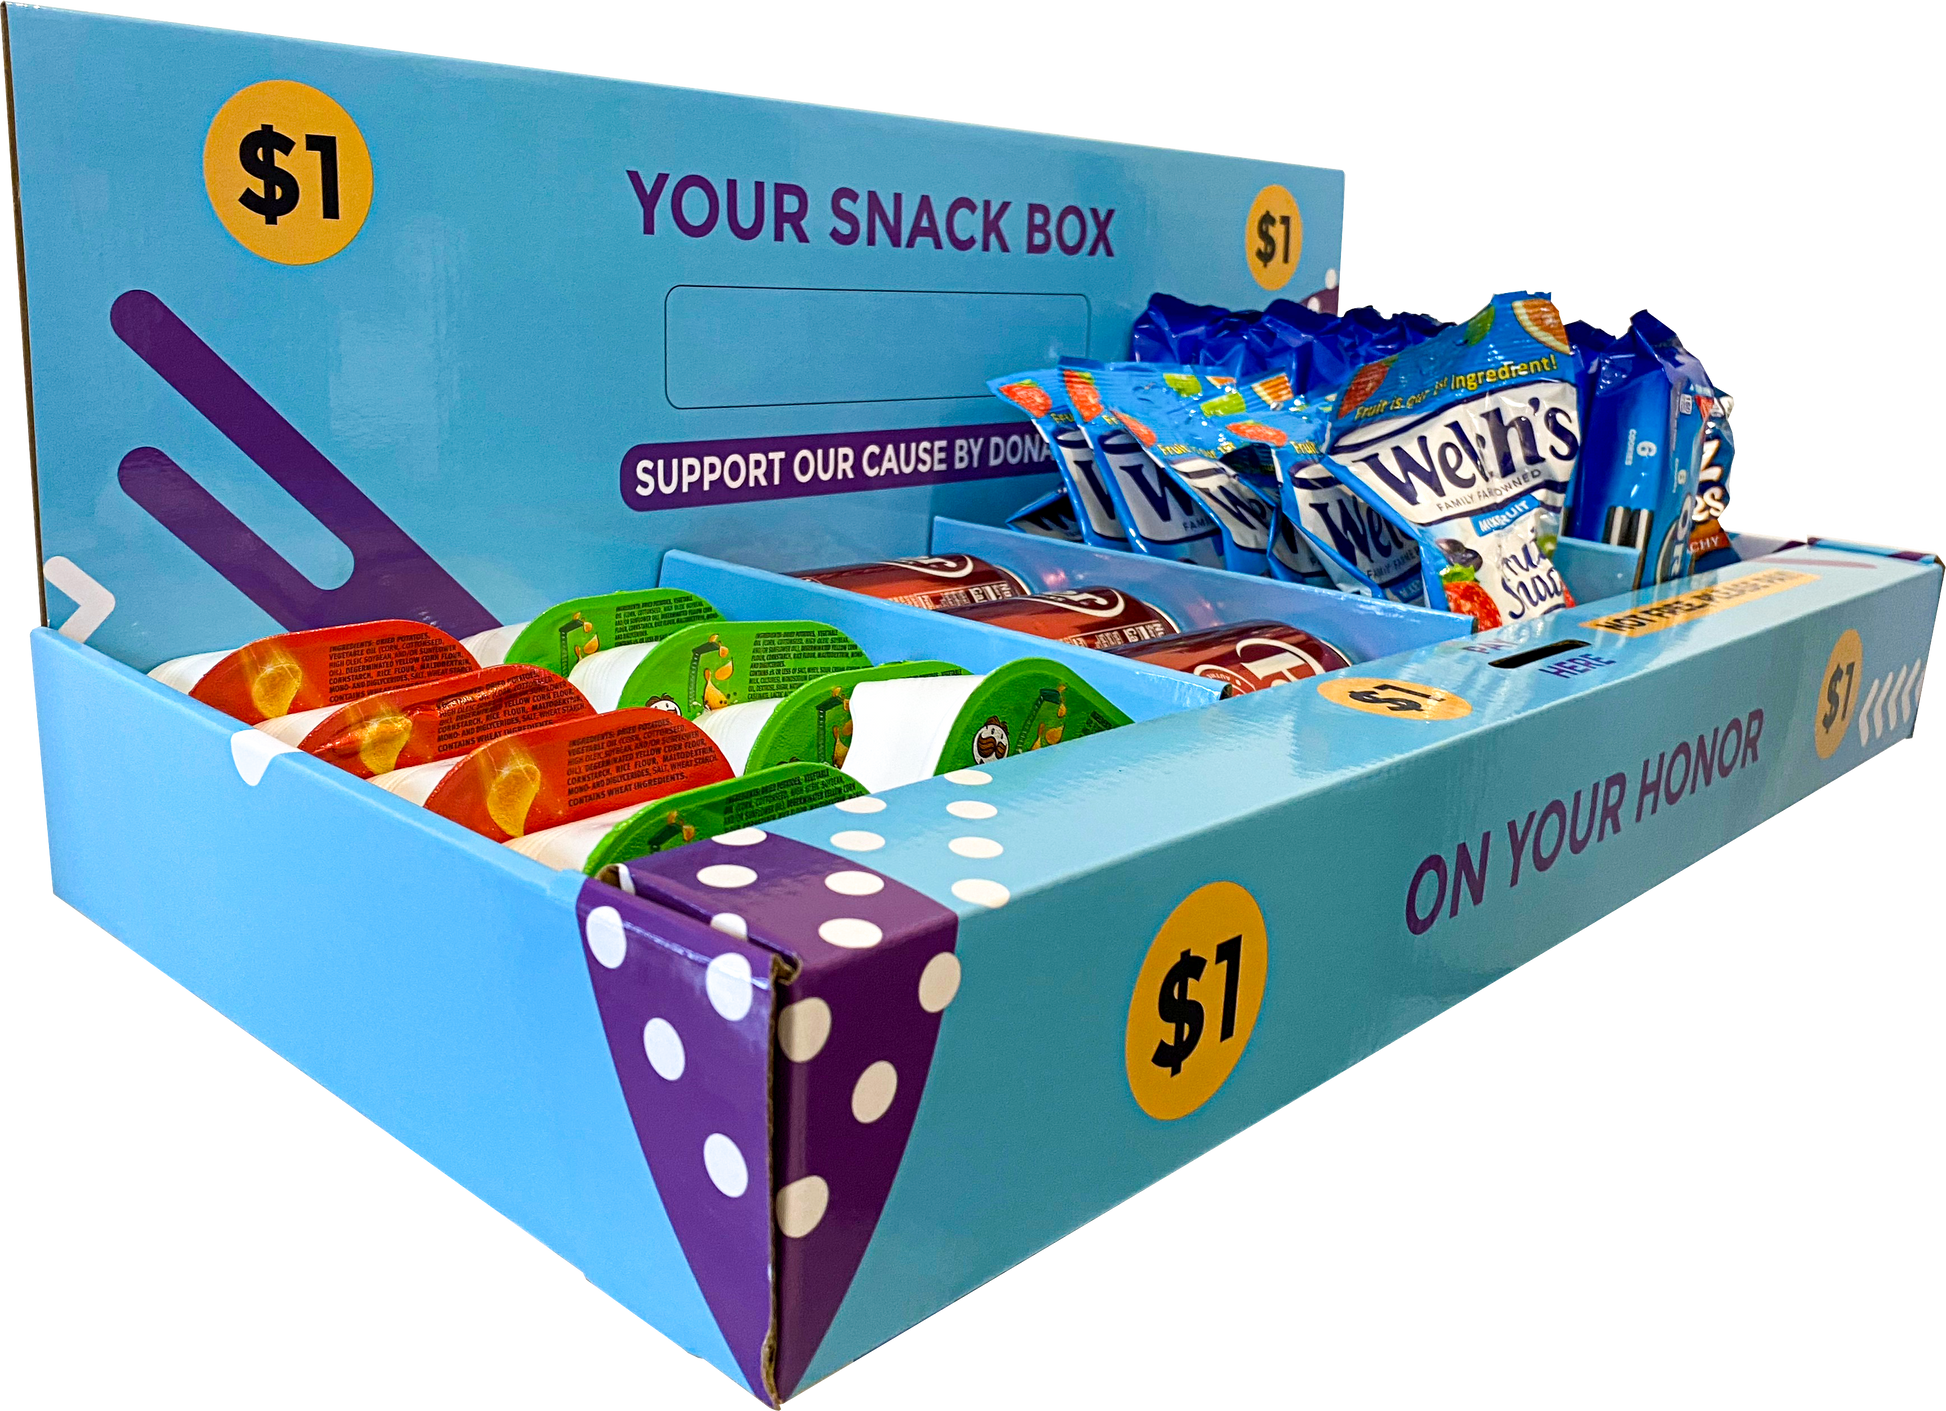 5 Vending Snack Boxes Business Package - Vending Business Solutions